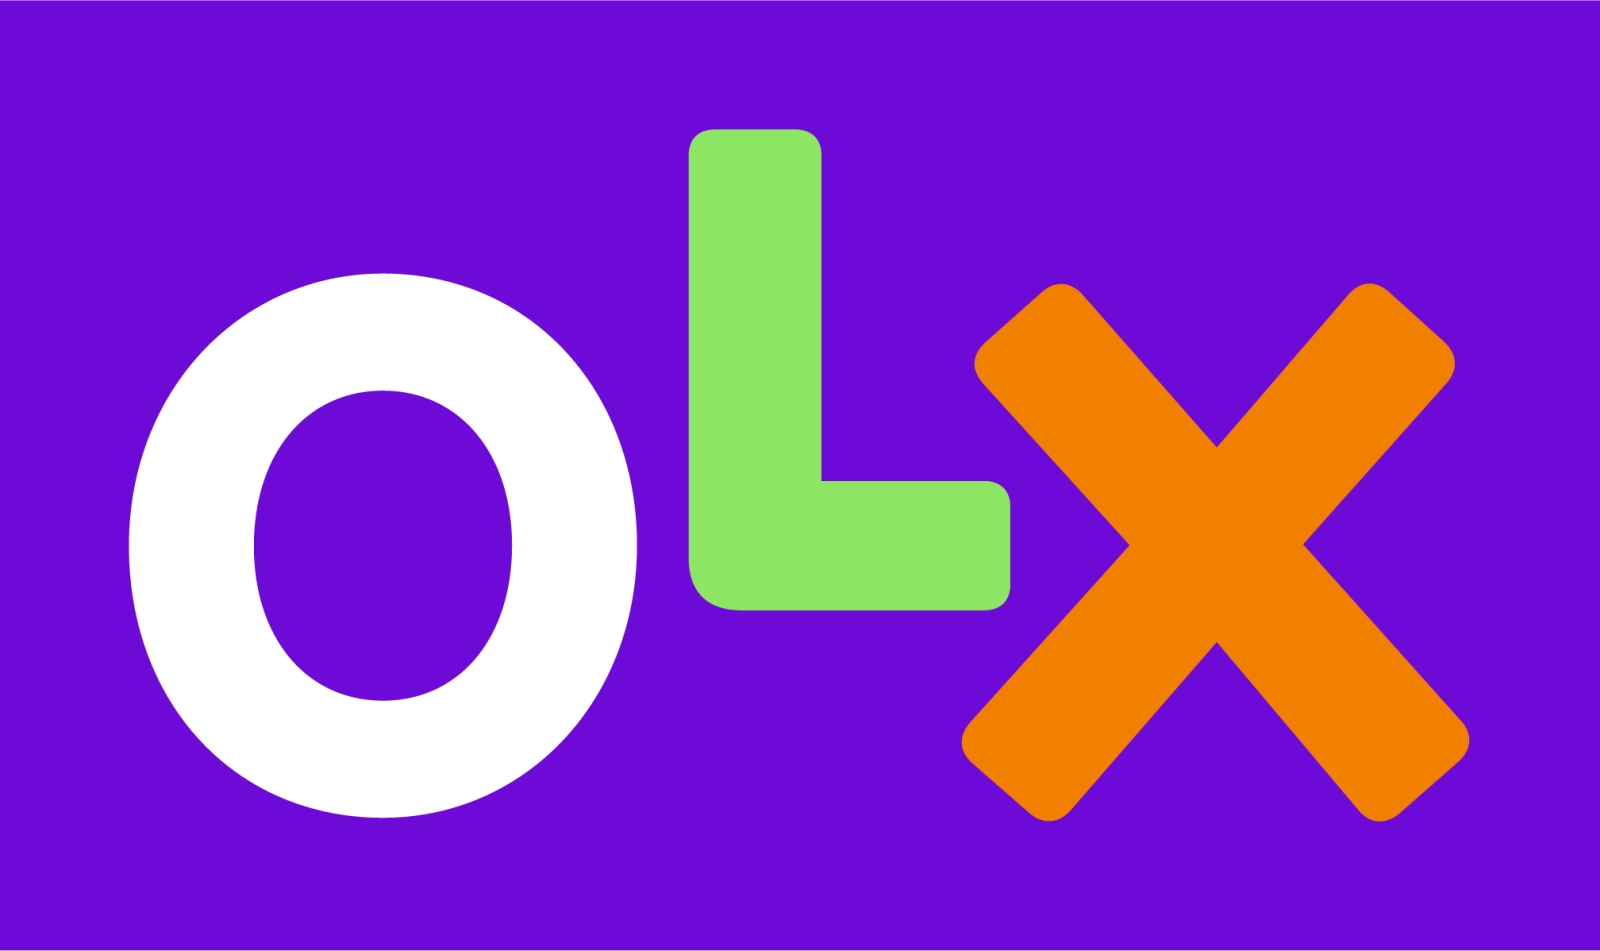 OLX Announces Free Shipping for Orders Throughout the Month of December